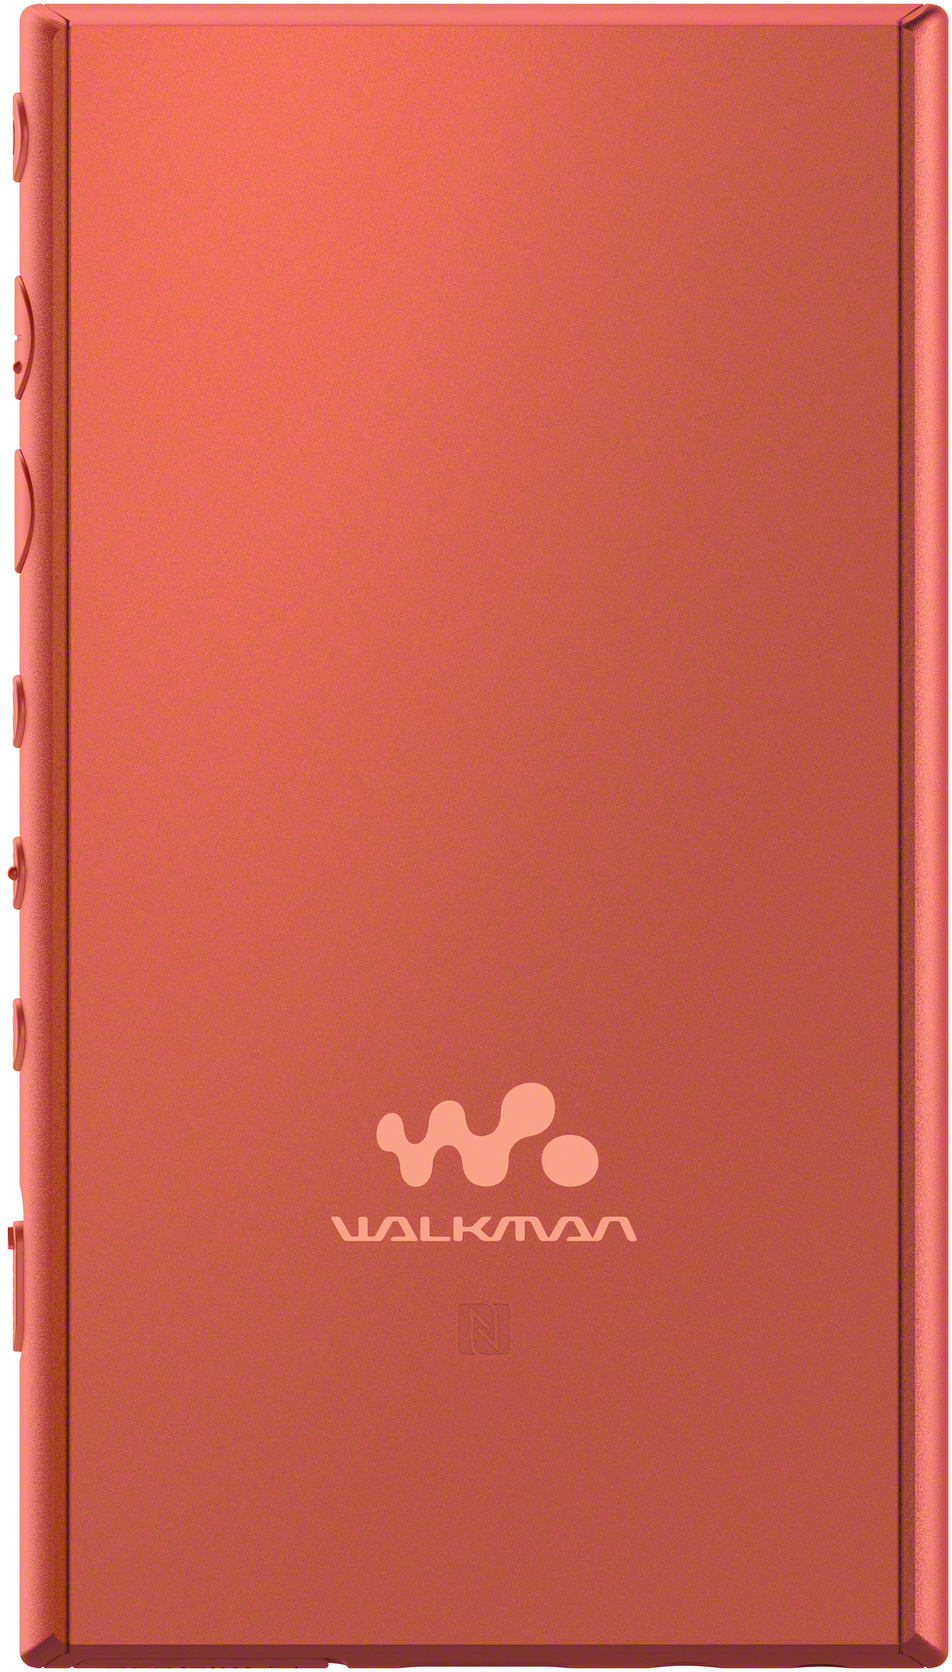 Walkman NW-A105 Orange 9.0 Android 16 SONY Mp3-Player GB,